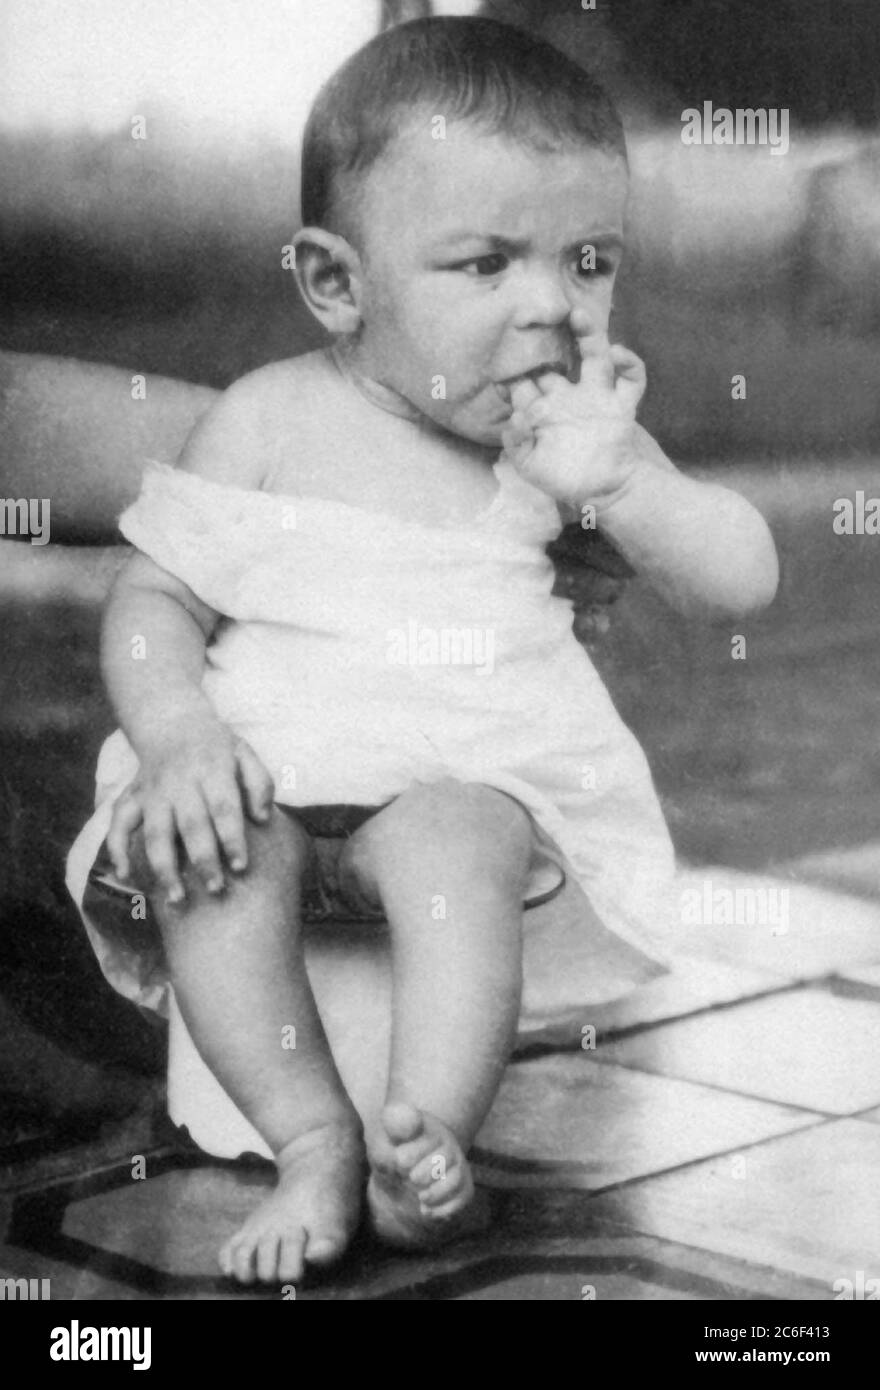 A baby Che Guevara in his early years in Argentina Stock Photo